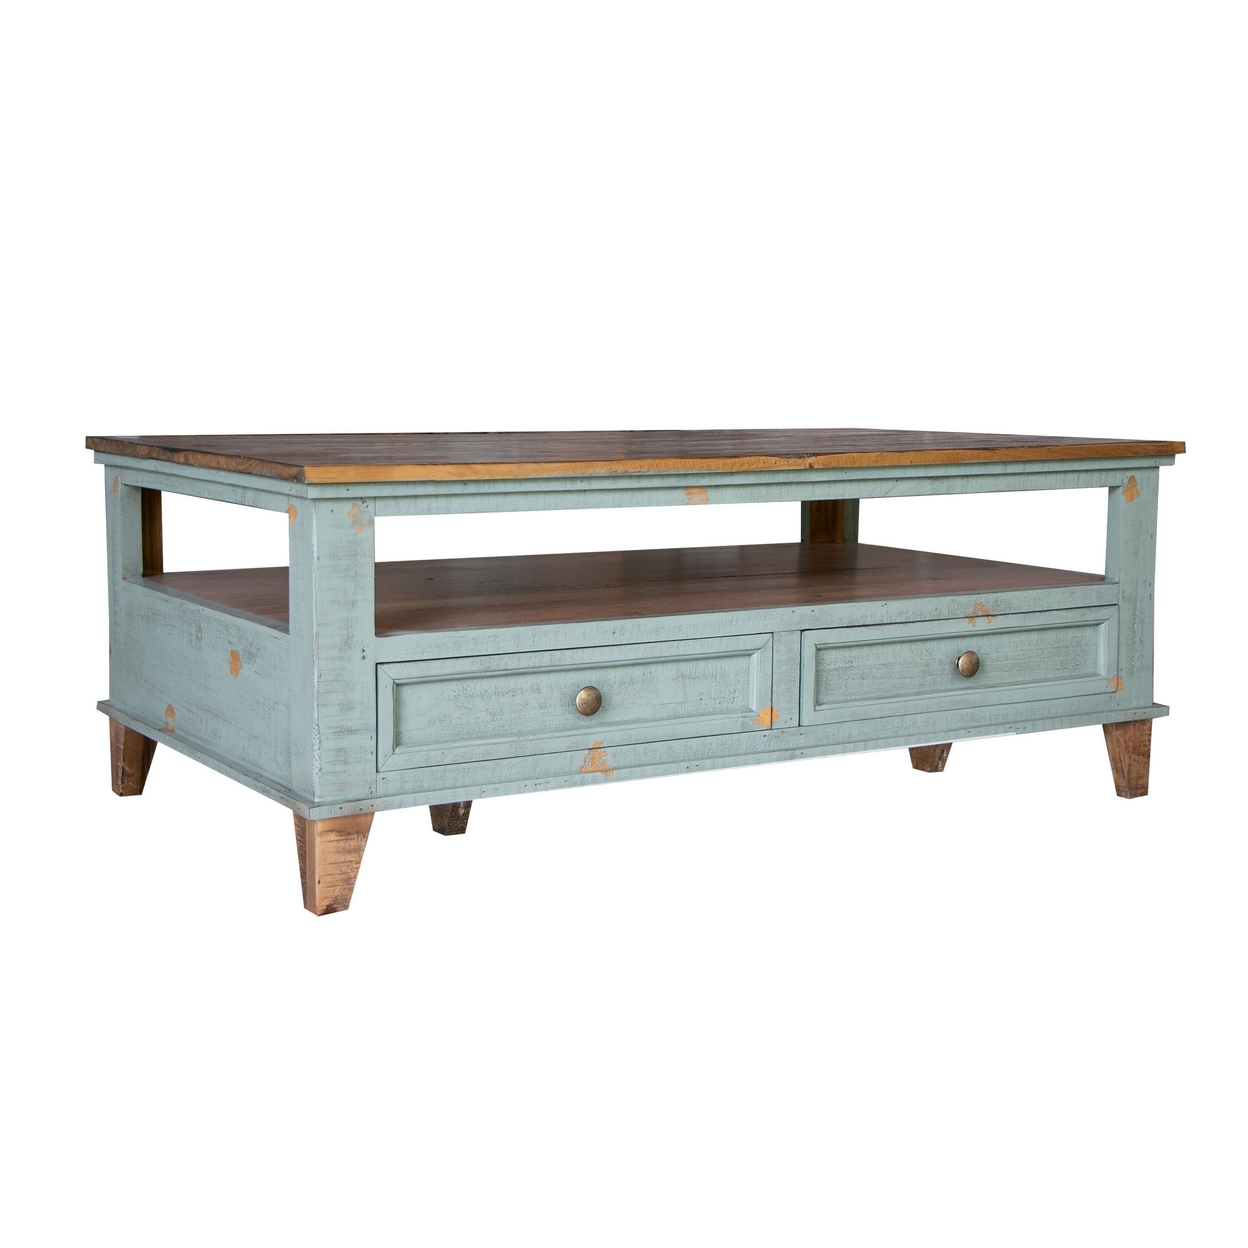 Rozy 50 Inch Coffee Table, 4 Drawers, Teal Blue Pine Wood, Hand Finished- Saltoro Sherpi